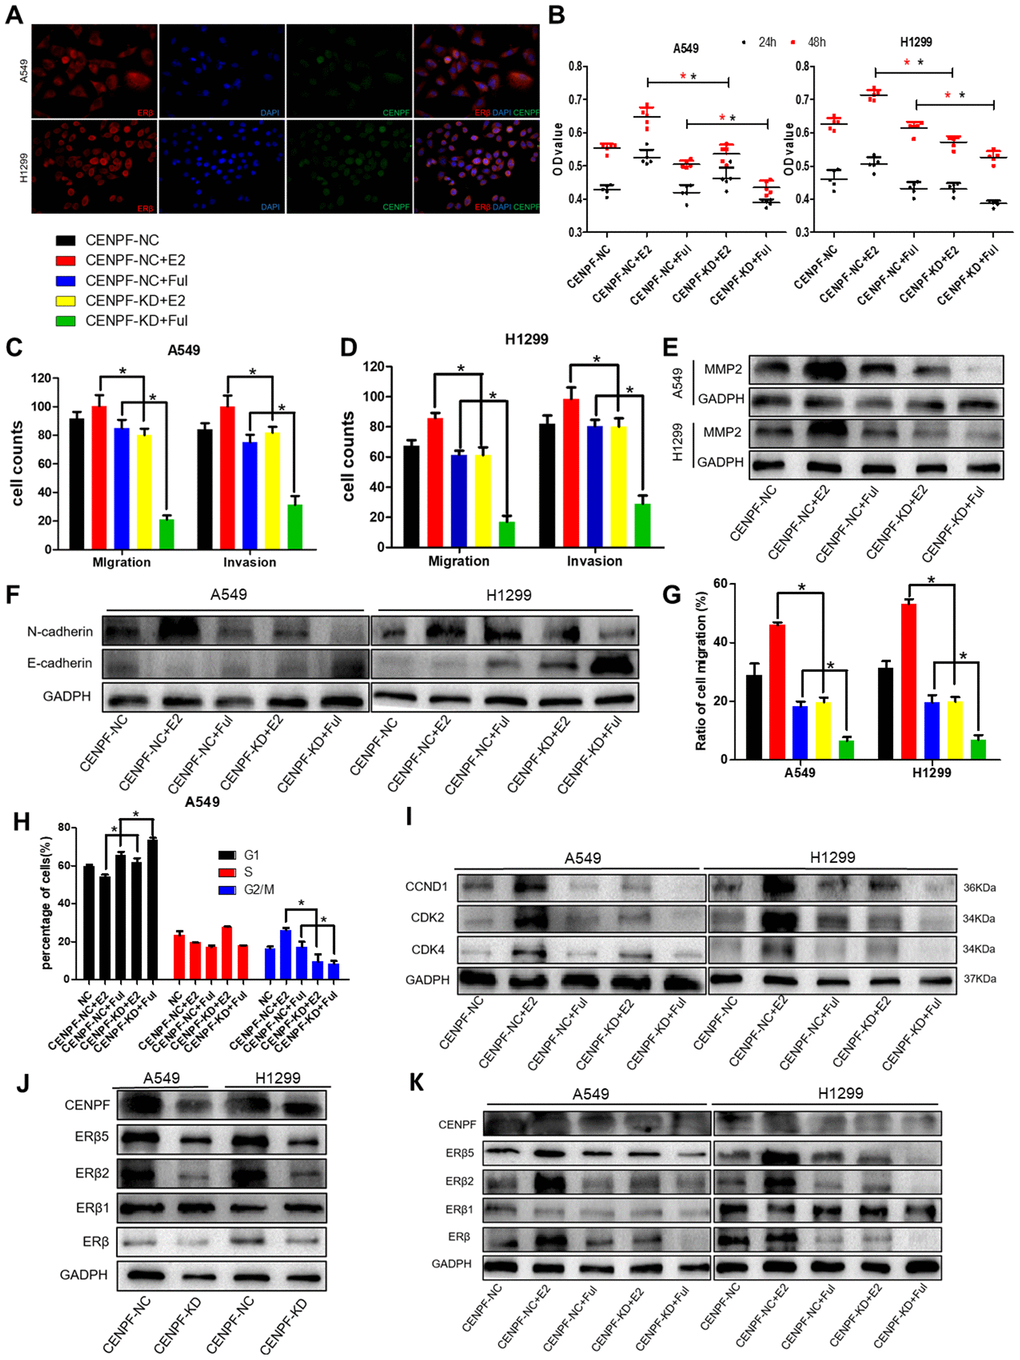 Knockdown of CENPF inhibits proliferation, invasion and migration of LUAD cells via the ERβ2/5 pathway. (A) Immunofluorescence showed the co-localization of CENPF and ERβ in A549 and H1299 cells (400 x). (B) Cell proliferation assays of different grouped cells at specific times in A549 and H1299 cells. (C, D) Corresponding quantified histograms of migration and invasion in A549 and H1299 cells. The invasion and migration of cells in CENPF-KD+E2 group were significantly reduced when compared with CENPF-NC+E2 group. (E, F) Protein expression of MMP2, N-cadherin and E-cadherin in A549 and H1299 cells (The corresponding gray value are shown in Supplementary Figure 4B–4D): The expression of MMP2 and N-cadherin were significantly decreased in CENPF-KD+E2 group when compared with CENPF-NC+E2 group. (G) Scratch experiment showed that the migration of CENPF-KD+E2 group was significantly lower than CENPF-NC+E2 group in A549 and H1299 cells (P=0.000, 0.000). (H) Corresponding quantified histograms of the A549 cells at different stages of the cell cycle (G1, S and G2/M). (I) Protein expression of CCND1, CDK2 and CDK4 in A549 and H1299 cells (The corresponding gray value are shown in Supplementary Figure 4F). *P J) Knockdown of CENPF inhibited the expression of ERβ2/5 in vitro. (The corresponding gray value are shown in Supplementary Figure 5A). (K) Protein expression of CENPF, ERβ, ERβ1, ERβ2 and ERβ5 in vitro experiment after treated with E2 and Ful treatment (The corresponding gray value are shown in Supplementary Figure 5C). *P 